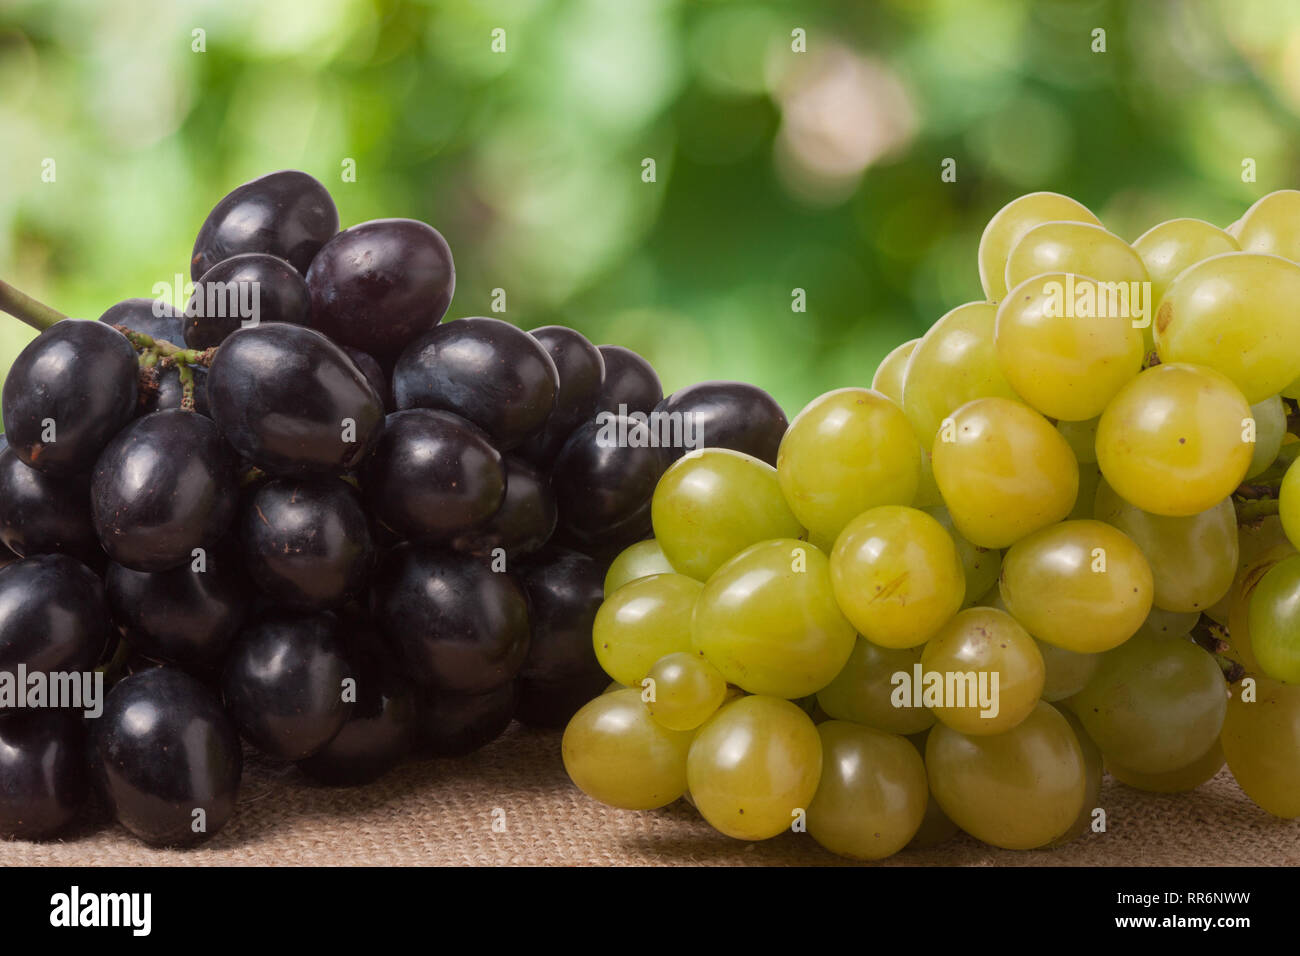 Blue and green grapes on the table with a blurred background Stock Photo